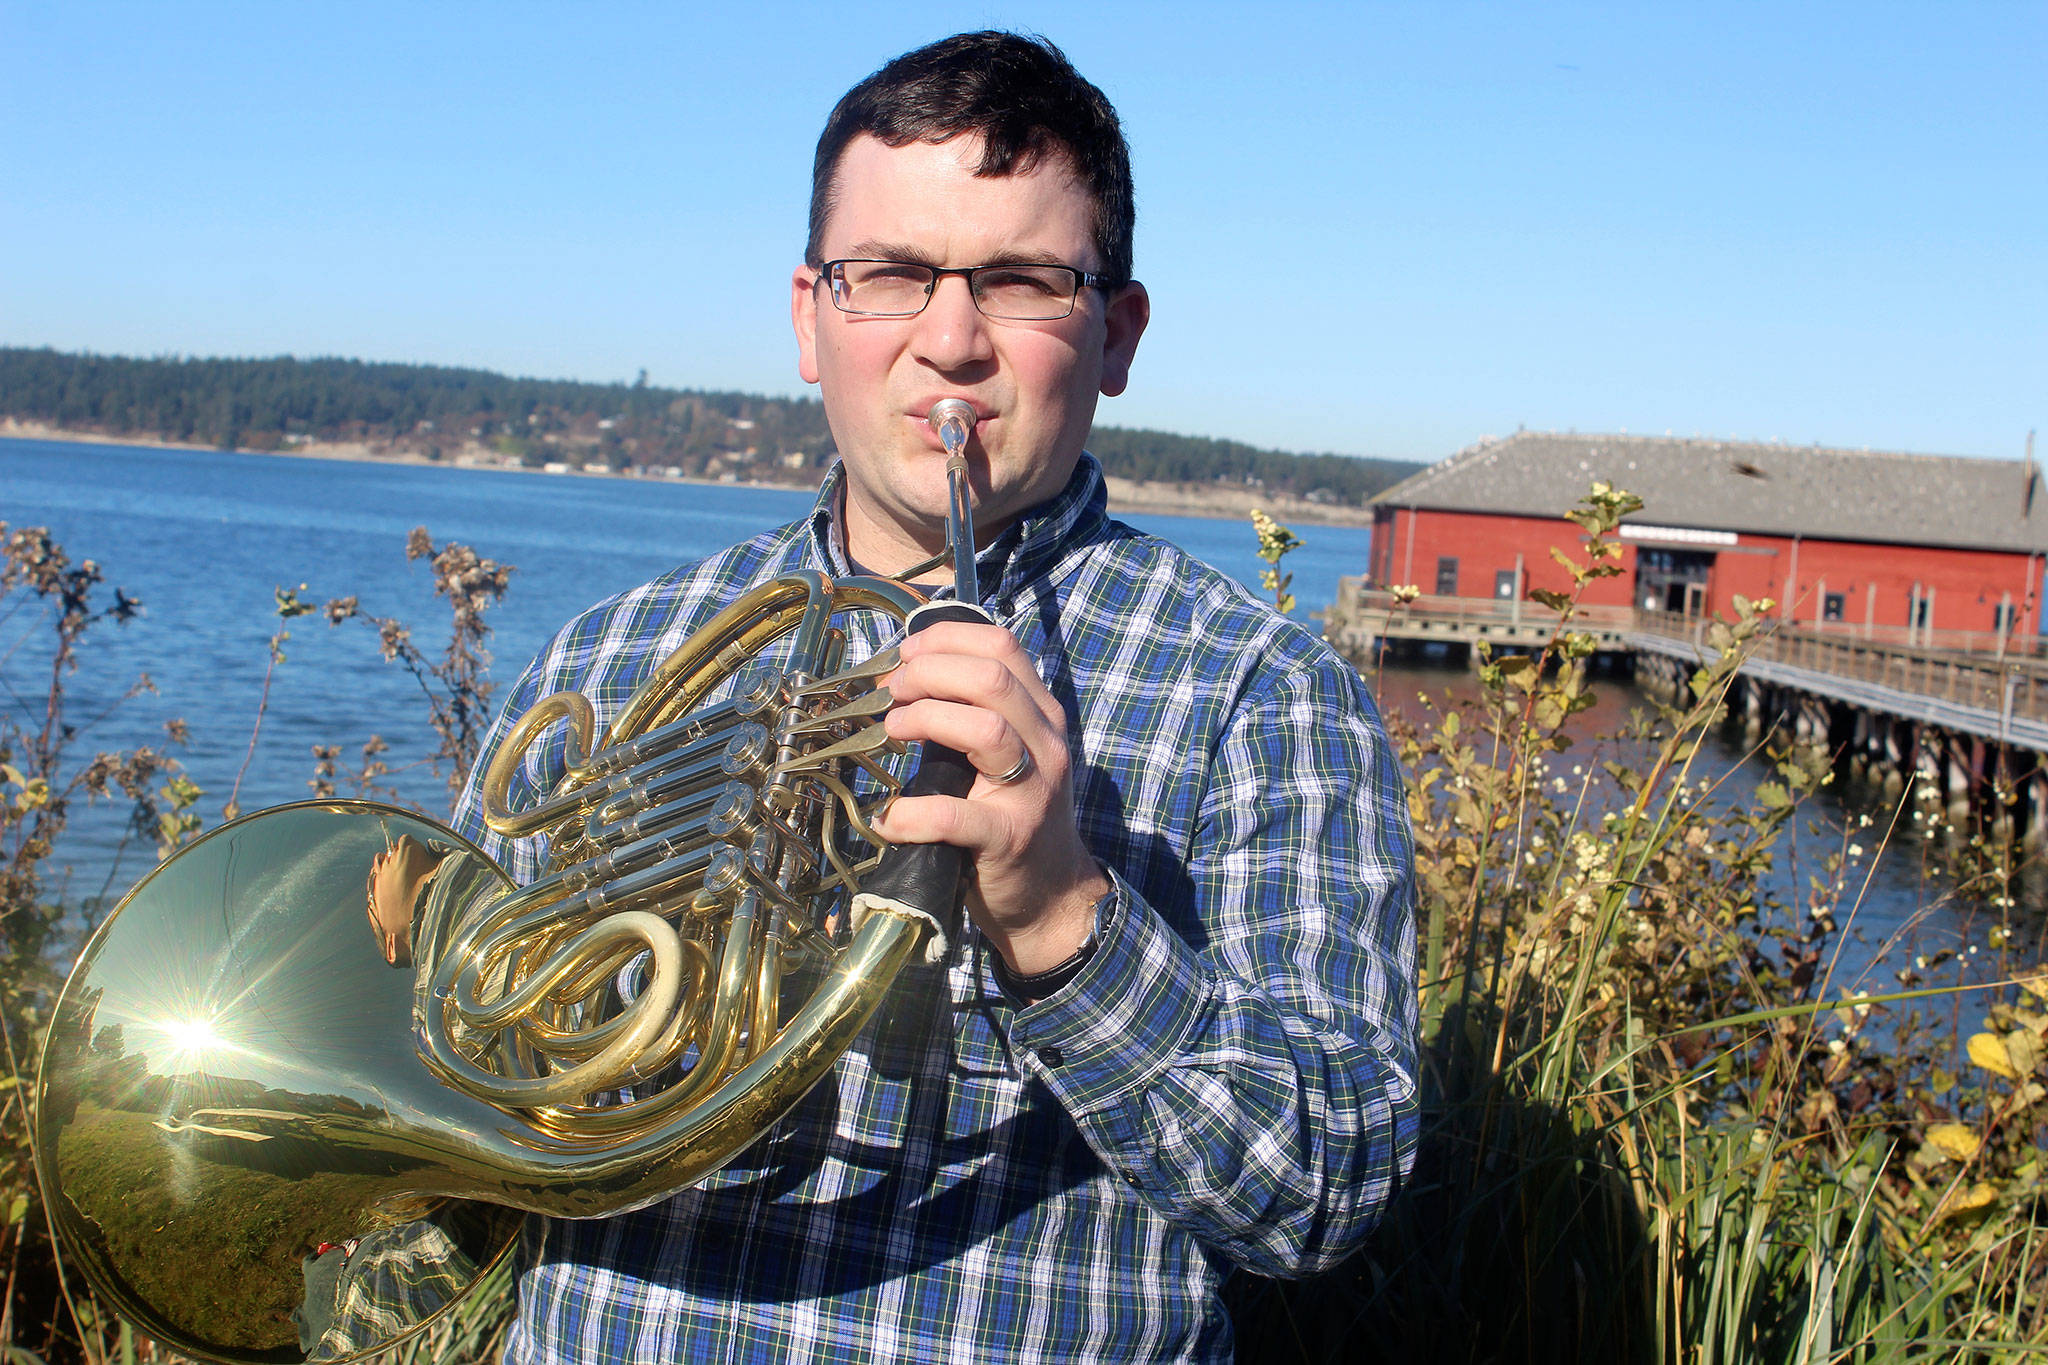 Sean Brown will be the soloist of Saratoga Orchestra’s 11th season opening concert this weekend. He’ll perform an original composition and play the horn. “I consider it the biggest opportunity of my life,” Brown said. Photos by Patricia Guthrie/Whidbey News-Times